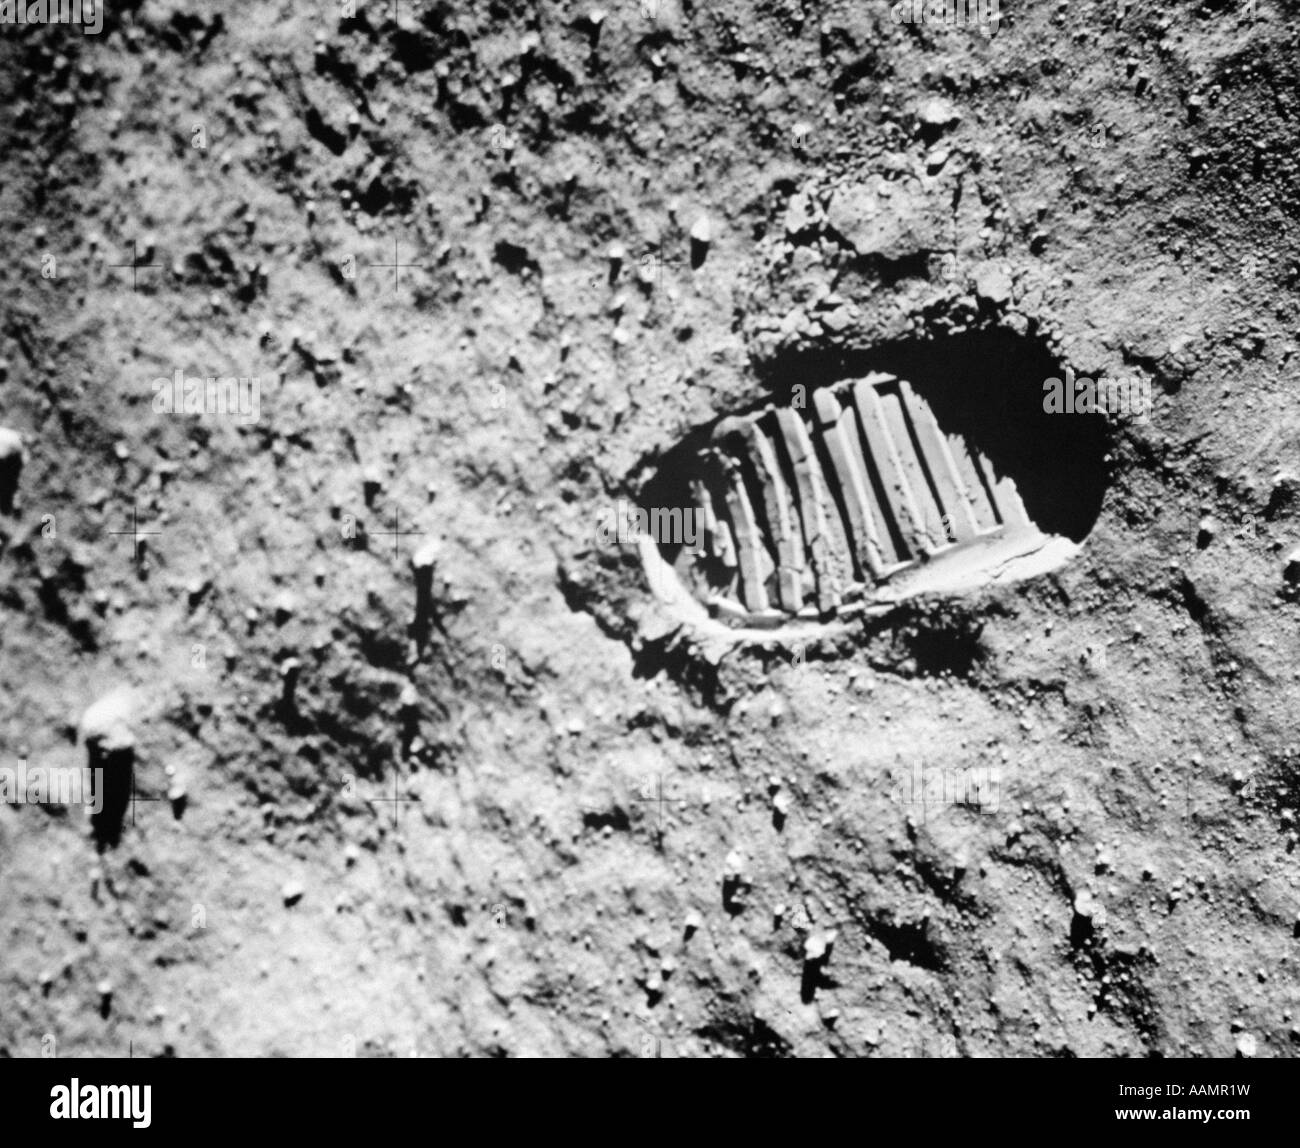 1960s FOOTPRINT OF FIRST STEP ON MOON'S SURFACE FROM APOLLO 11 MISSION Stock Photo